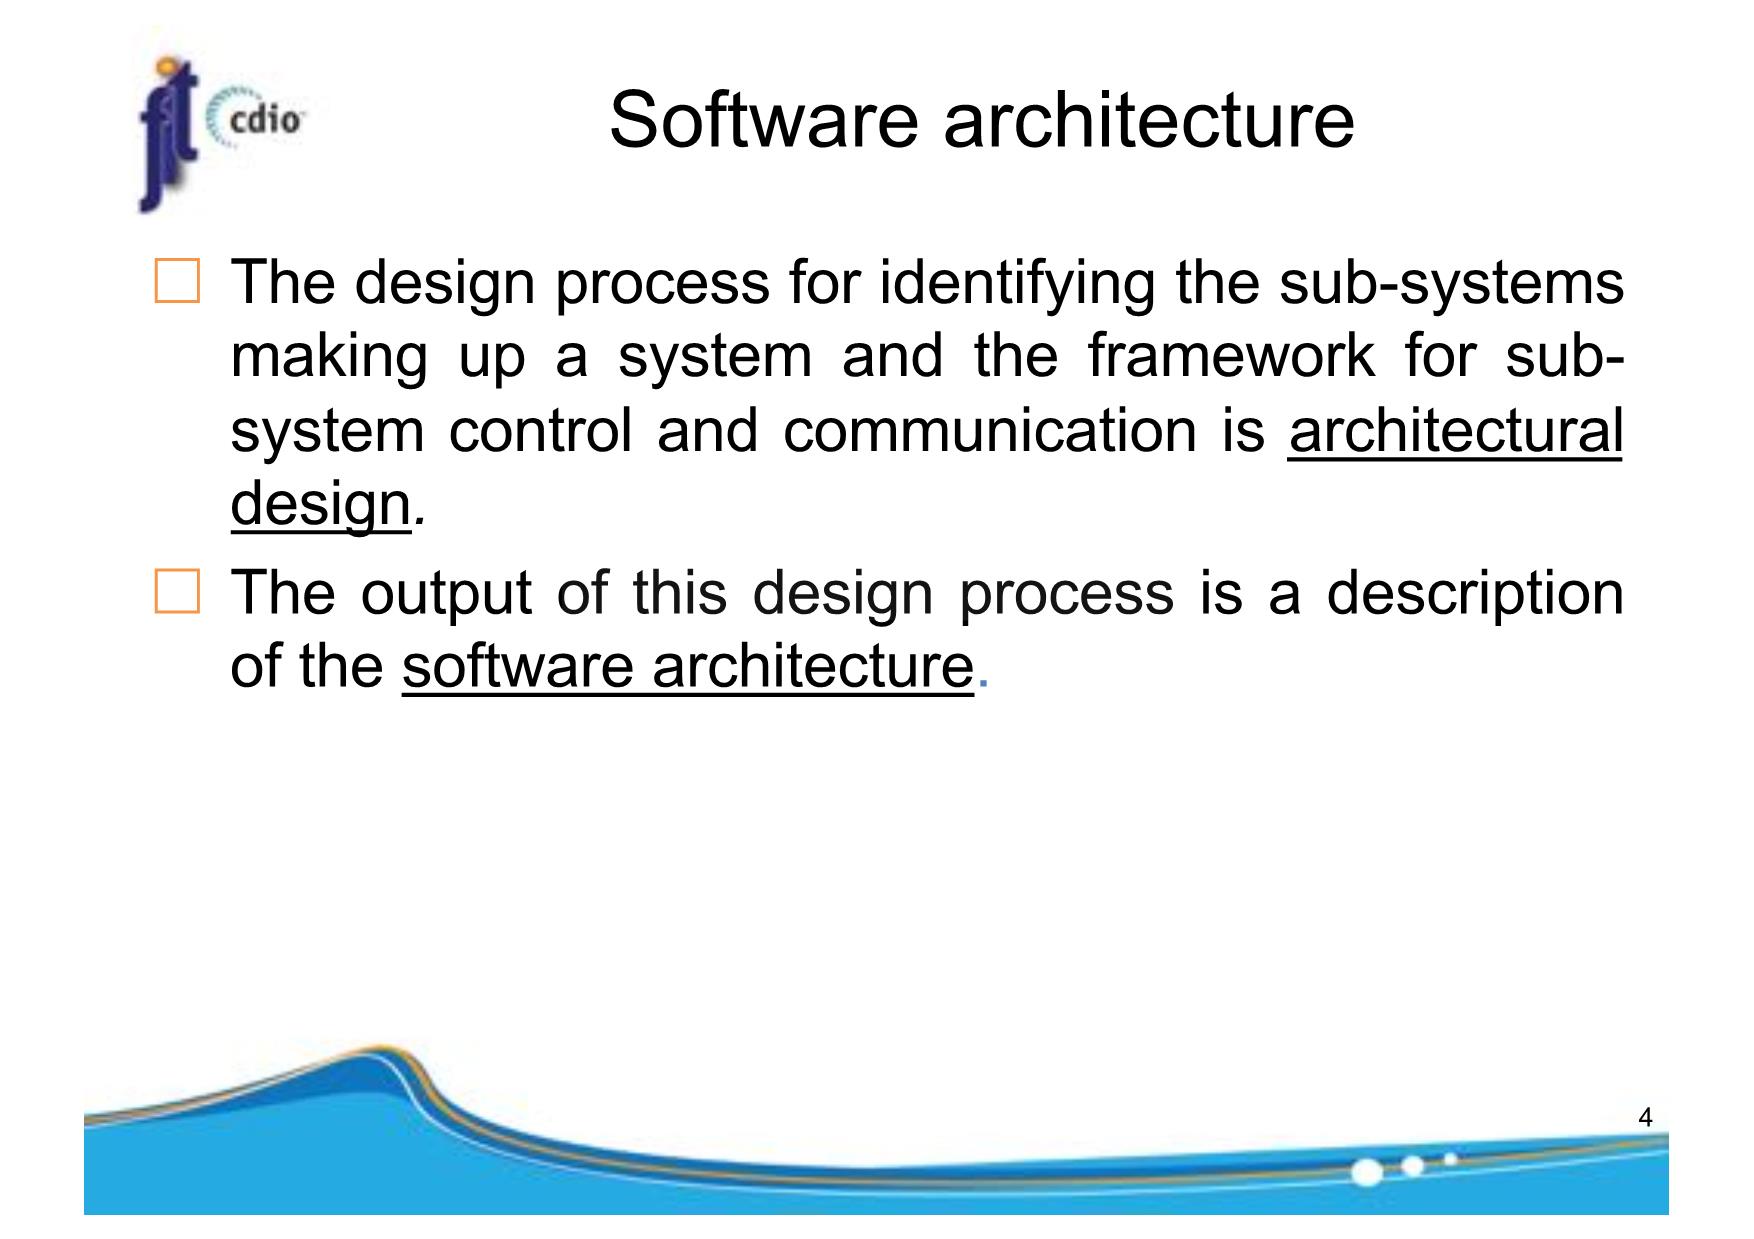 Bài giảng Introduction to Software Engineering - Week 6: Architectural Design - Nguyễn Thị Minh Tuyền trang 4